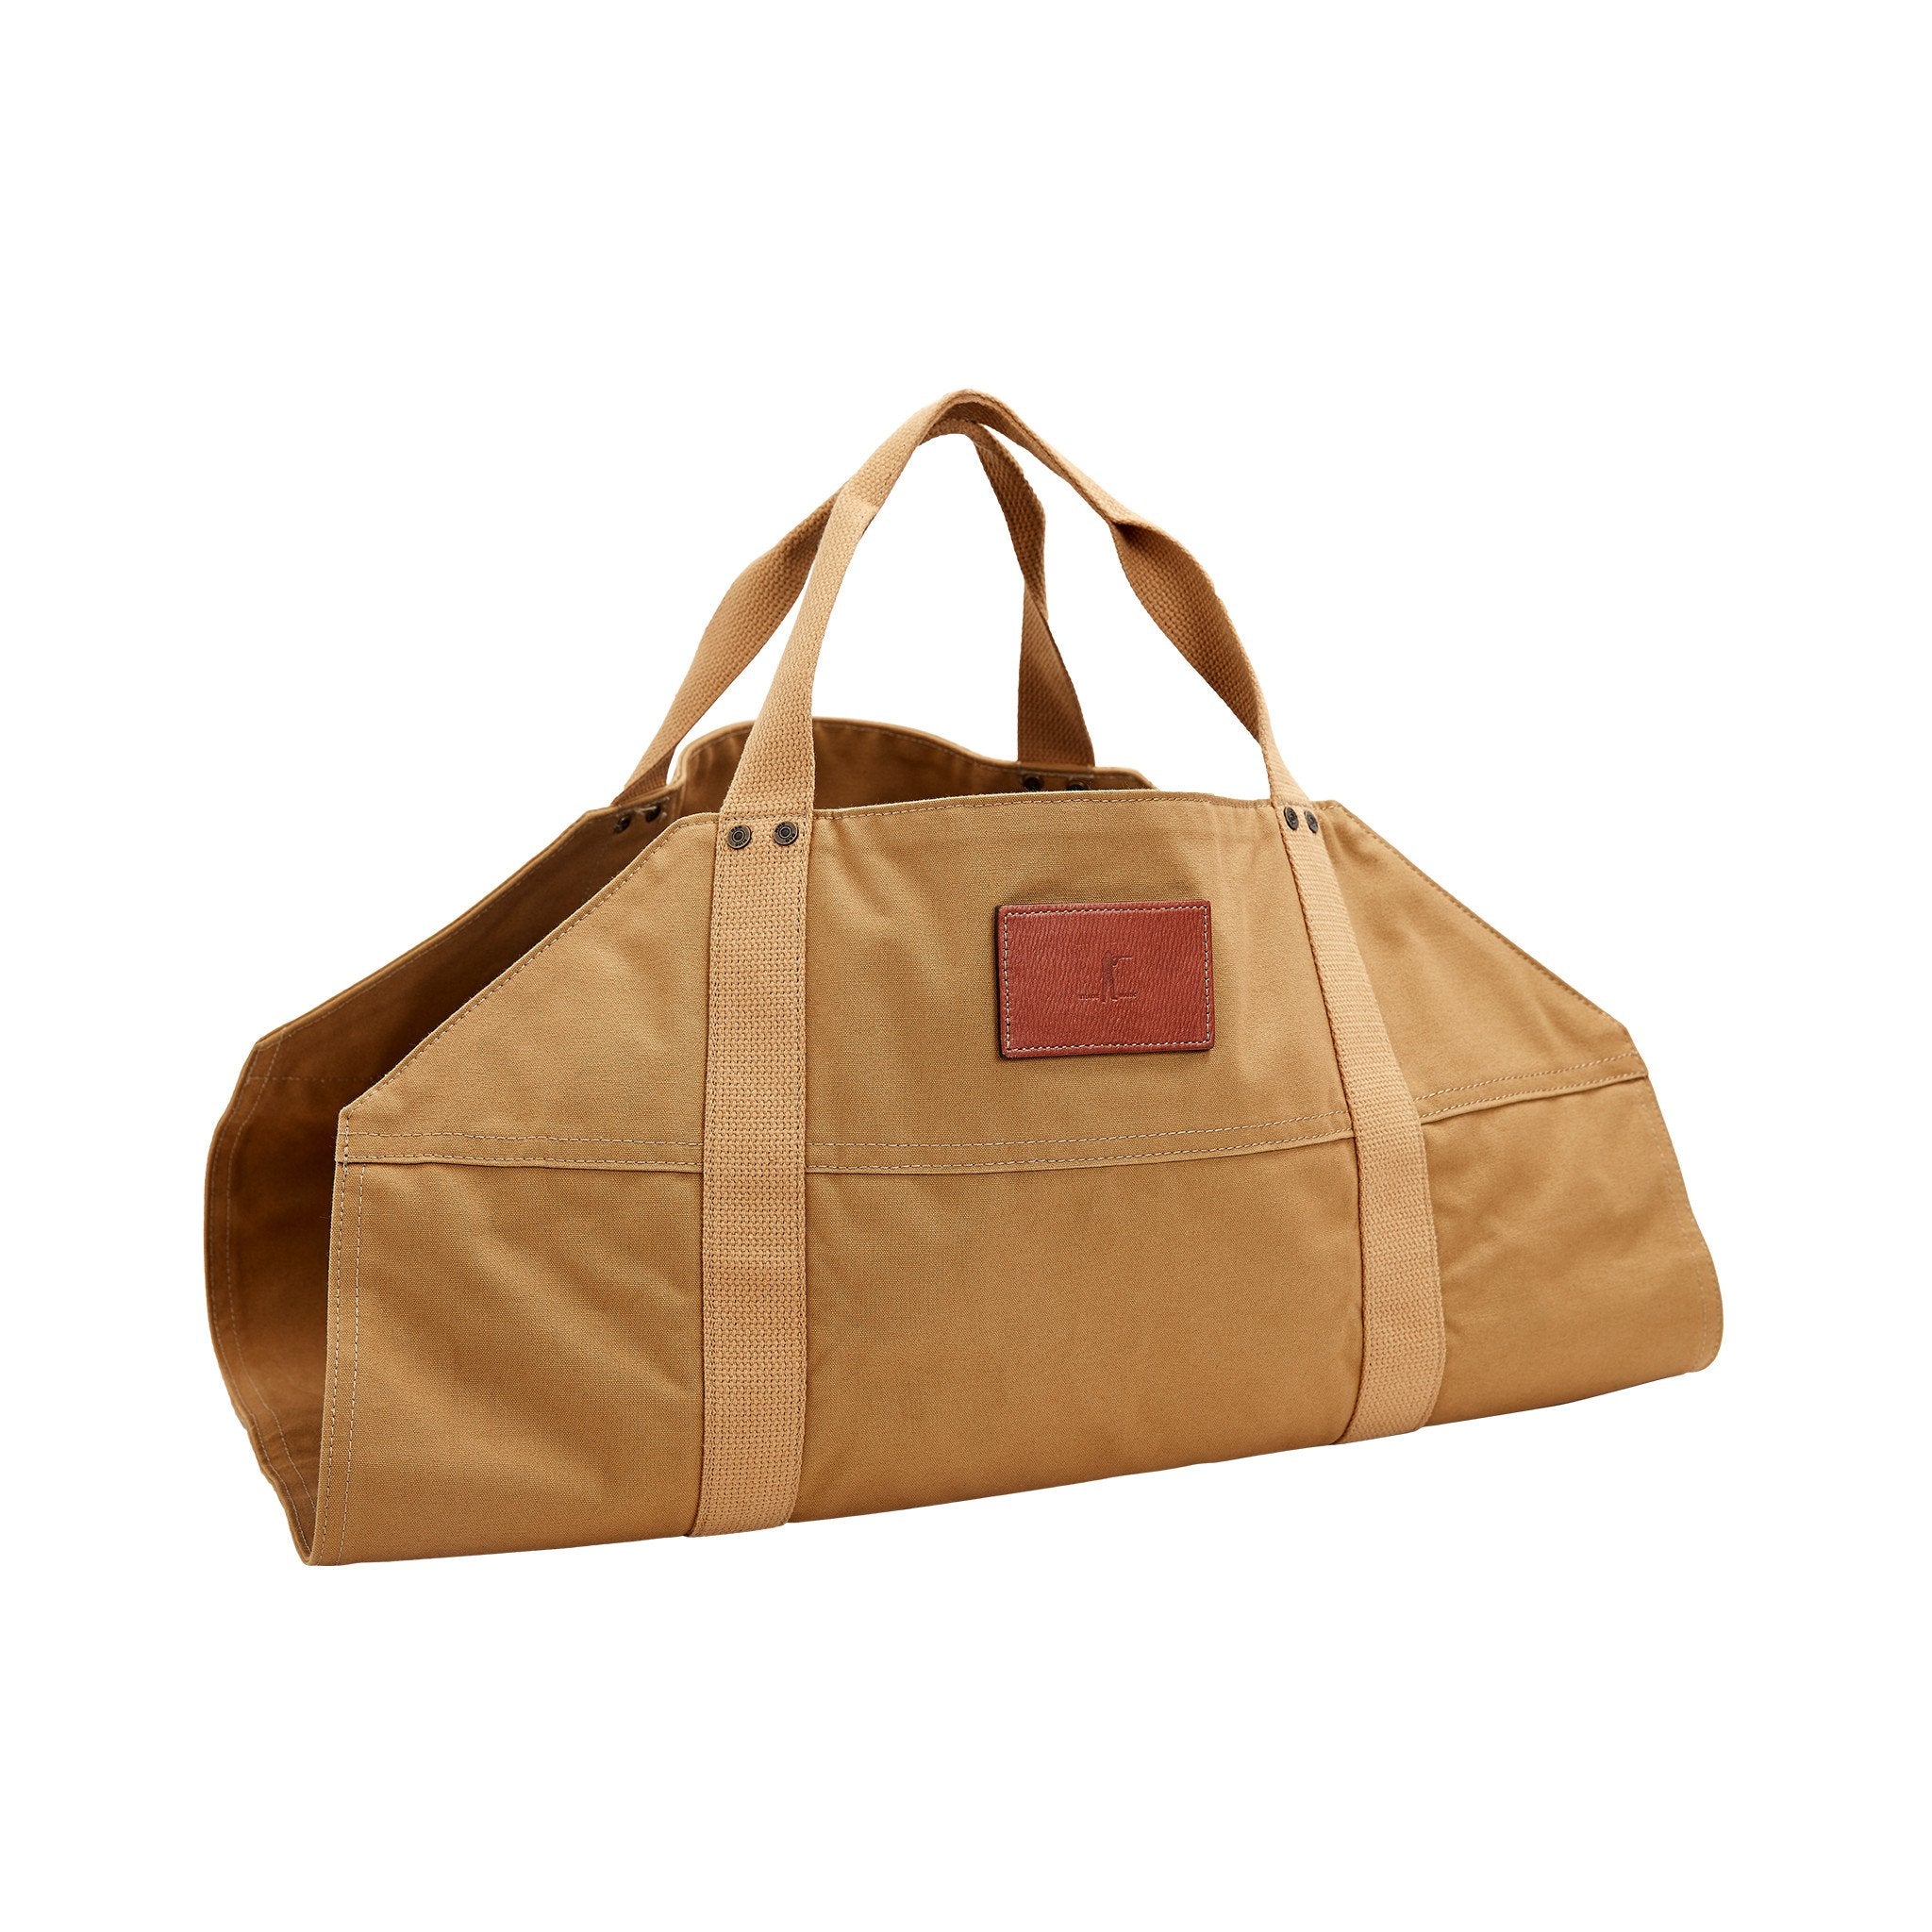 The Firewood Carrier, Signature Canvas